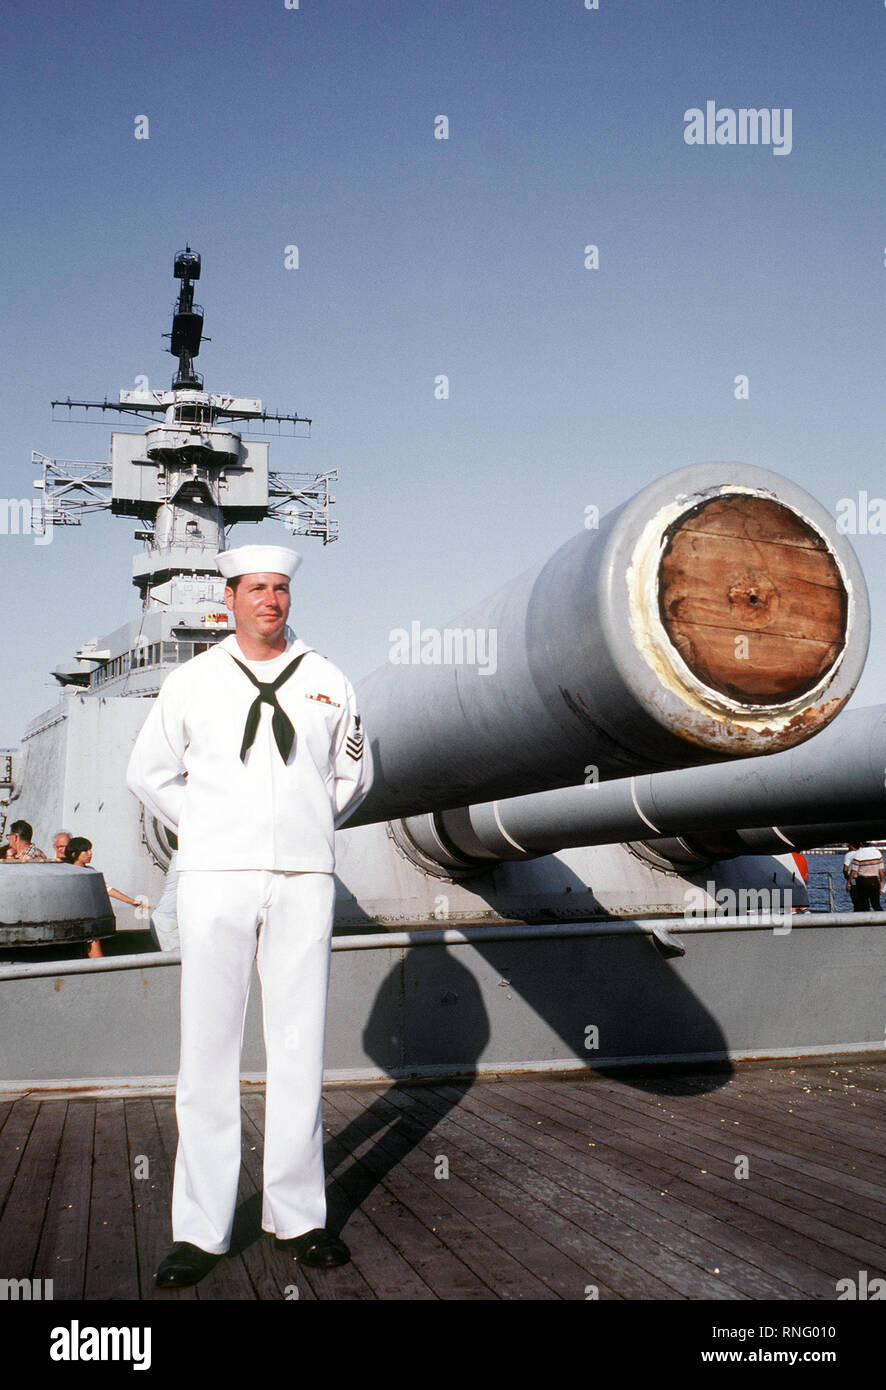 A crewman in a dress white uniform stands near Mark 7 16-inch/50-caliber guns on the forward deck of the battleship USS NEW JERSEY (BB-62).  The ship was recently towed here for refitting and reactivation. Stock Photo